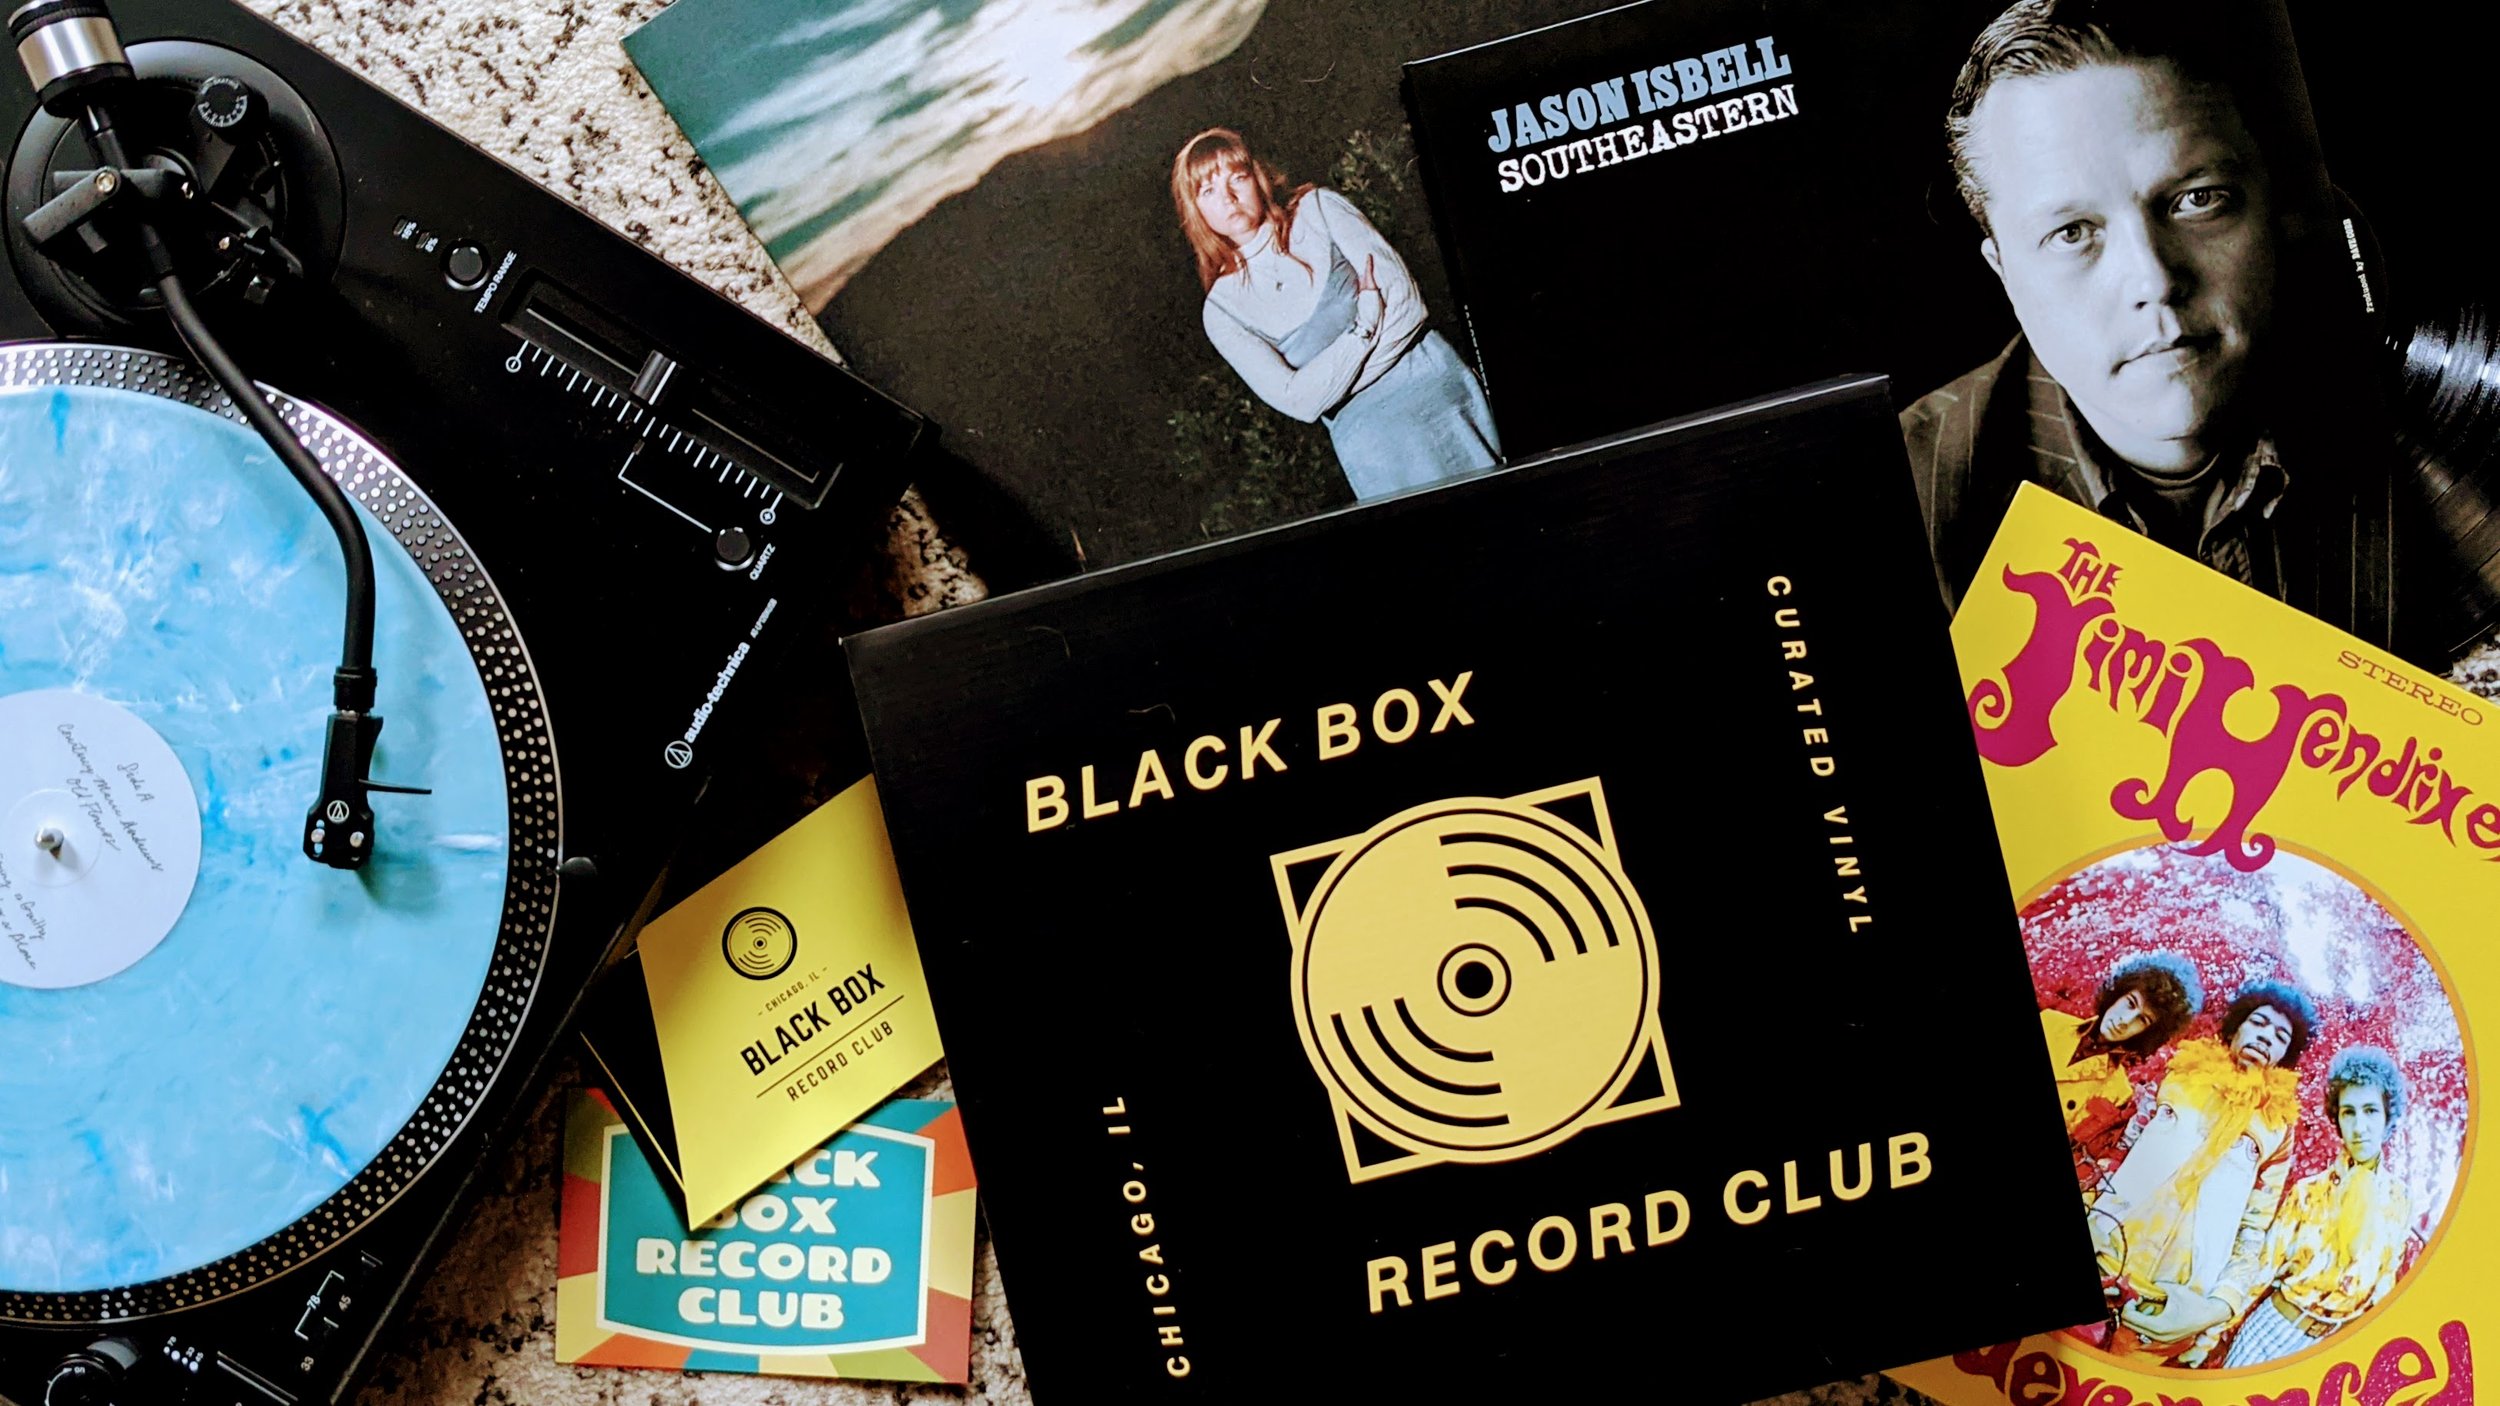 For 3 months in a row,  Vinyl of the month club has tried